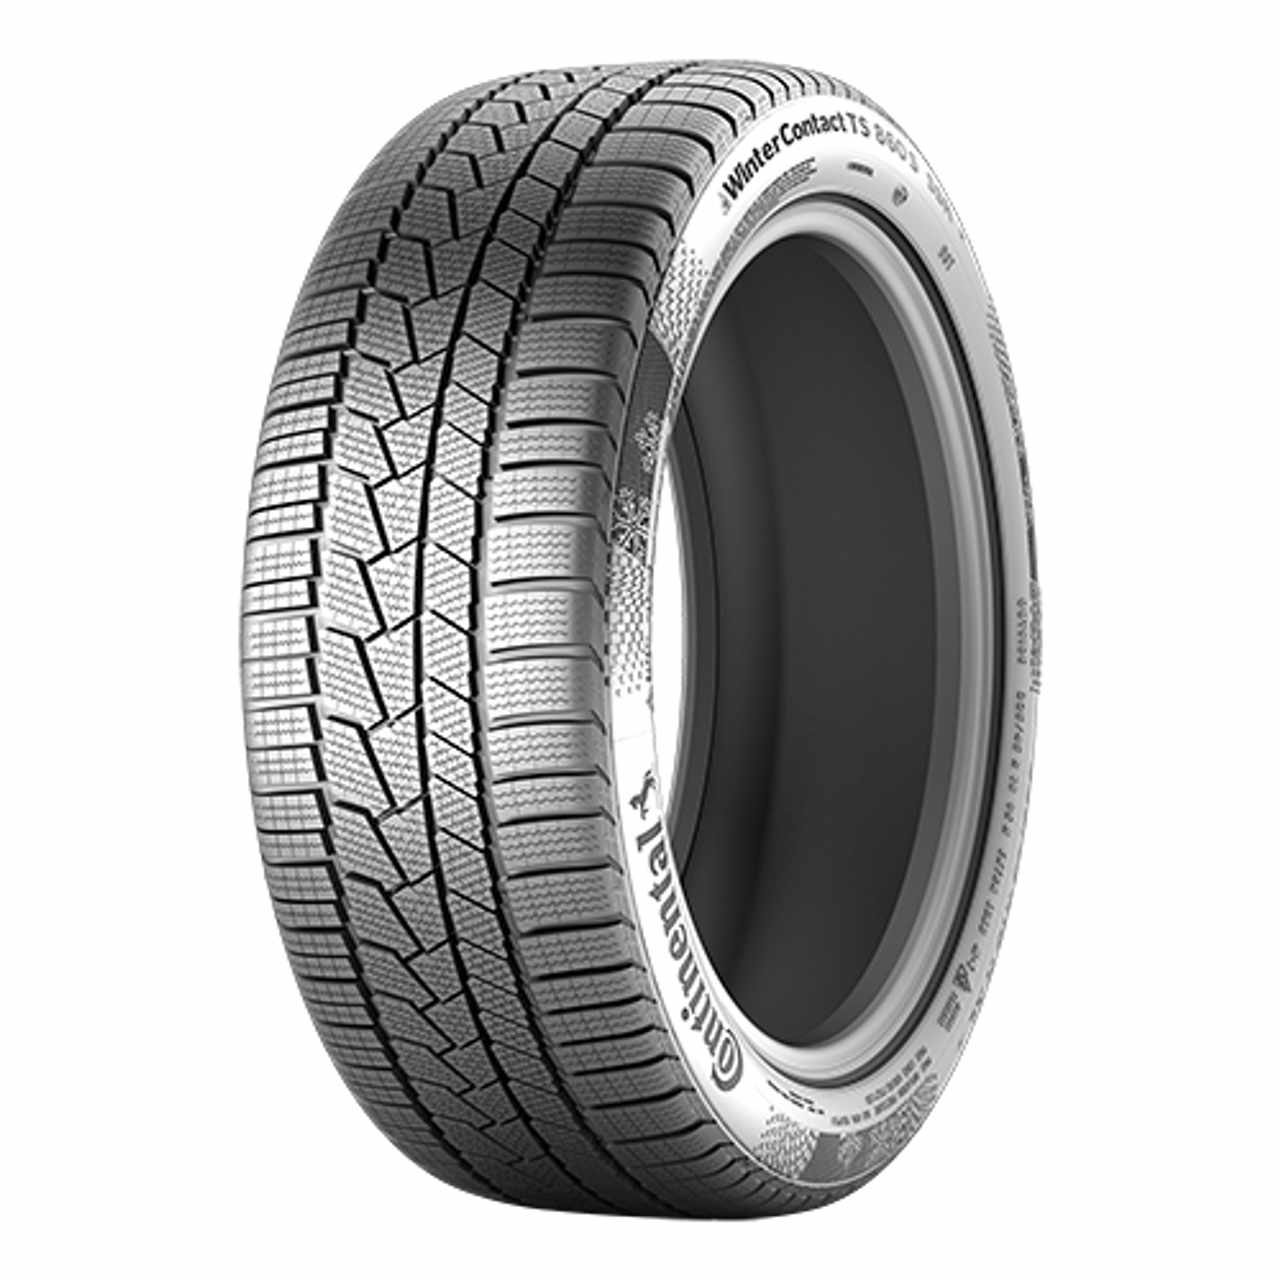 CONTINENTAL WINTERCONTACT TS 860 S (EVc) 245/35R19 93V FR BSW